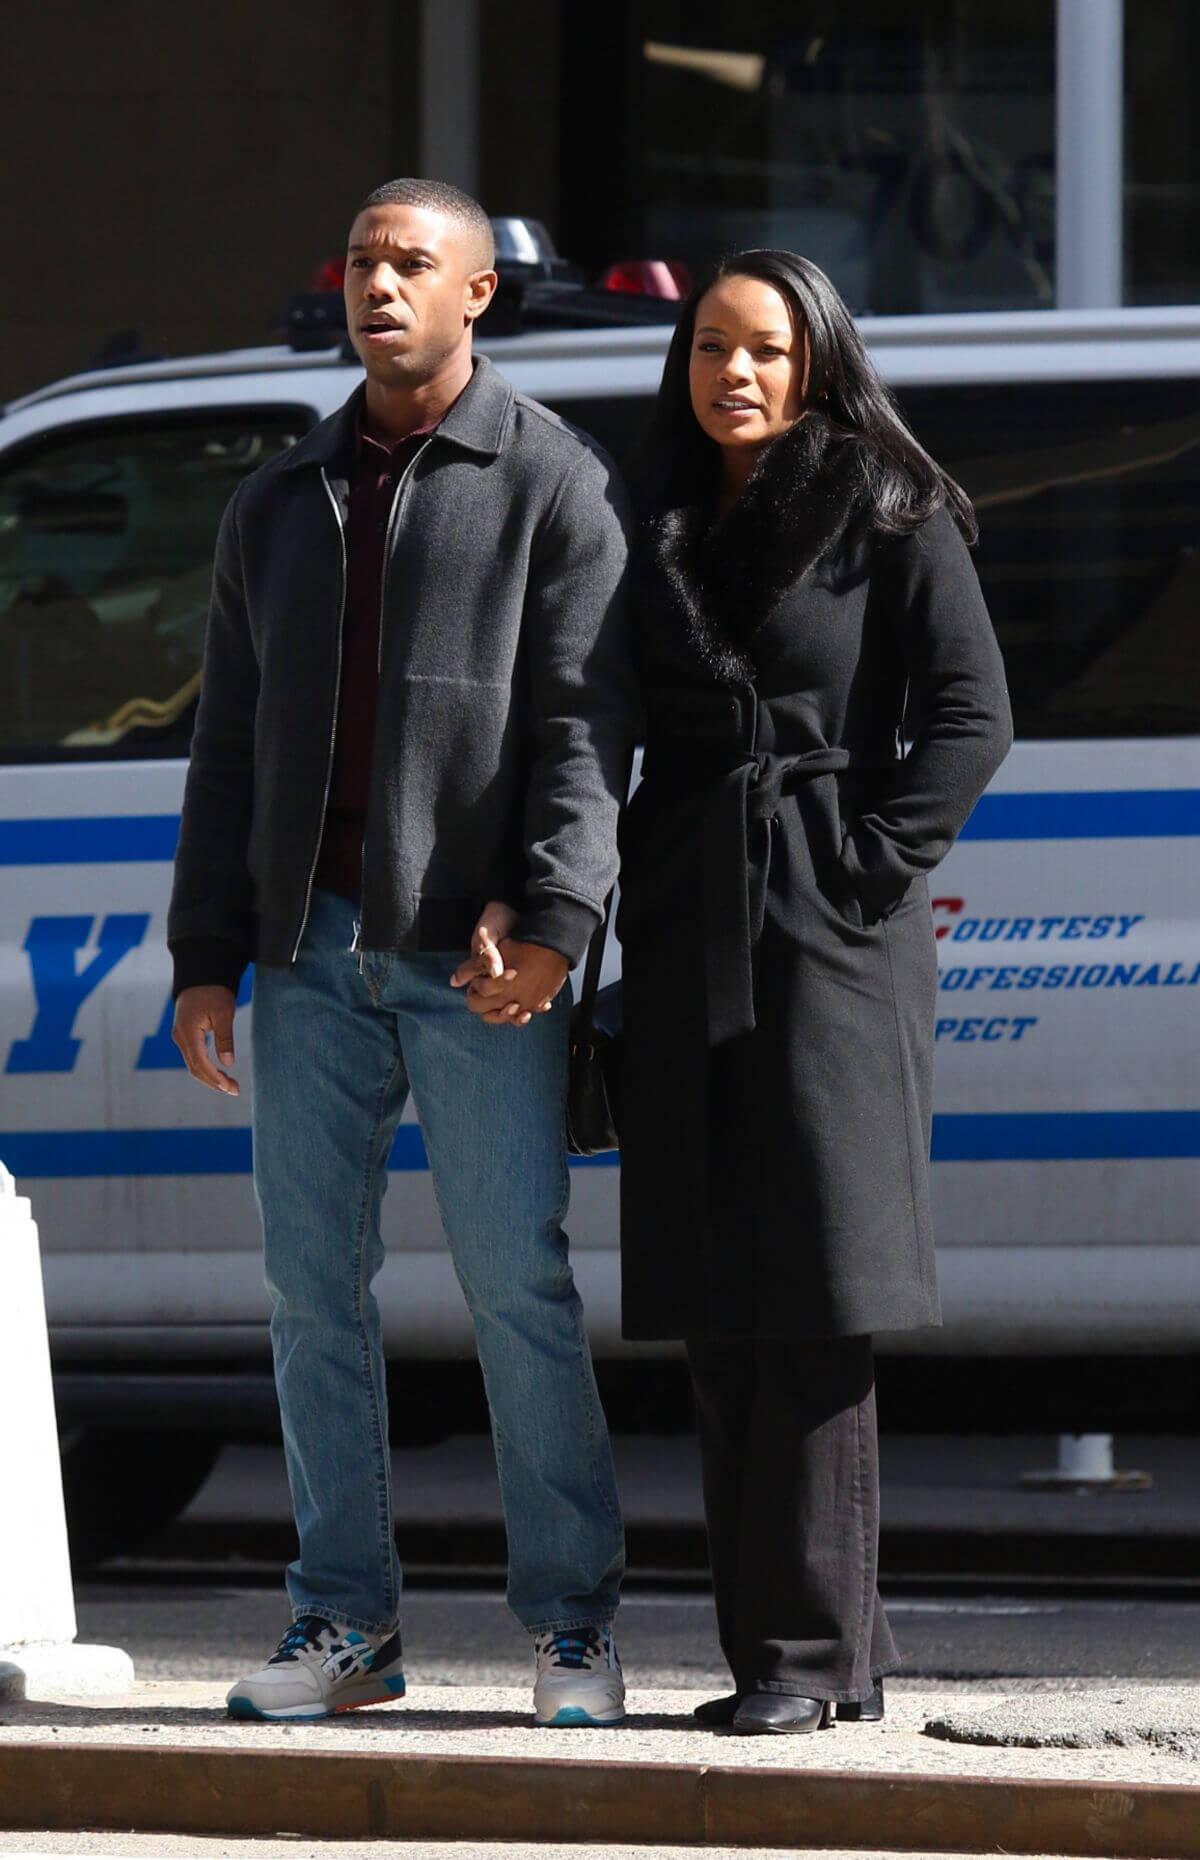 Chante Adams and Michael B. Jordan Hold Hands as They are Filming for A Journal for Jordan 03/12/2021